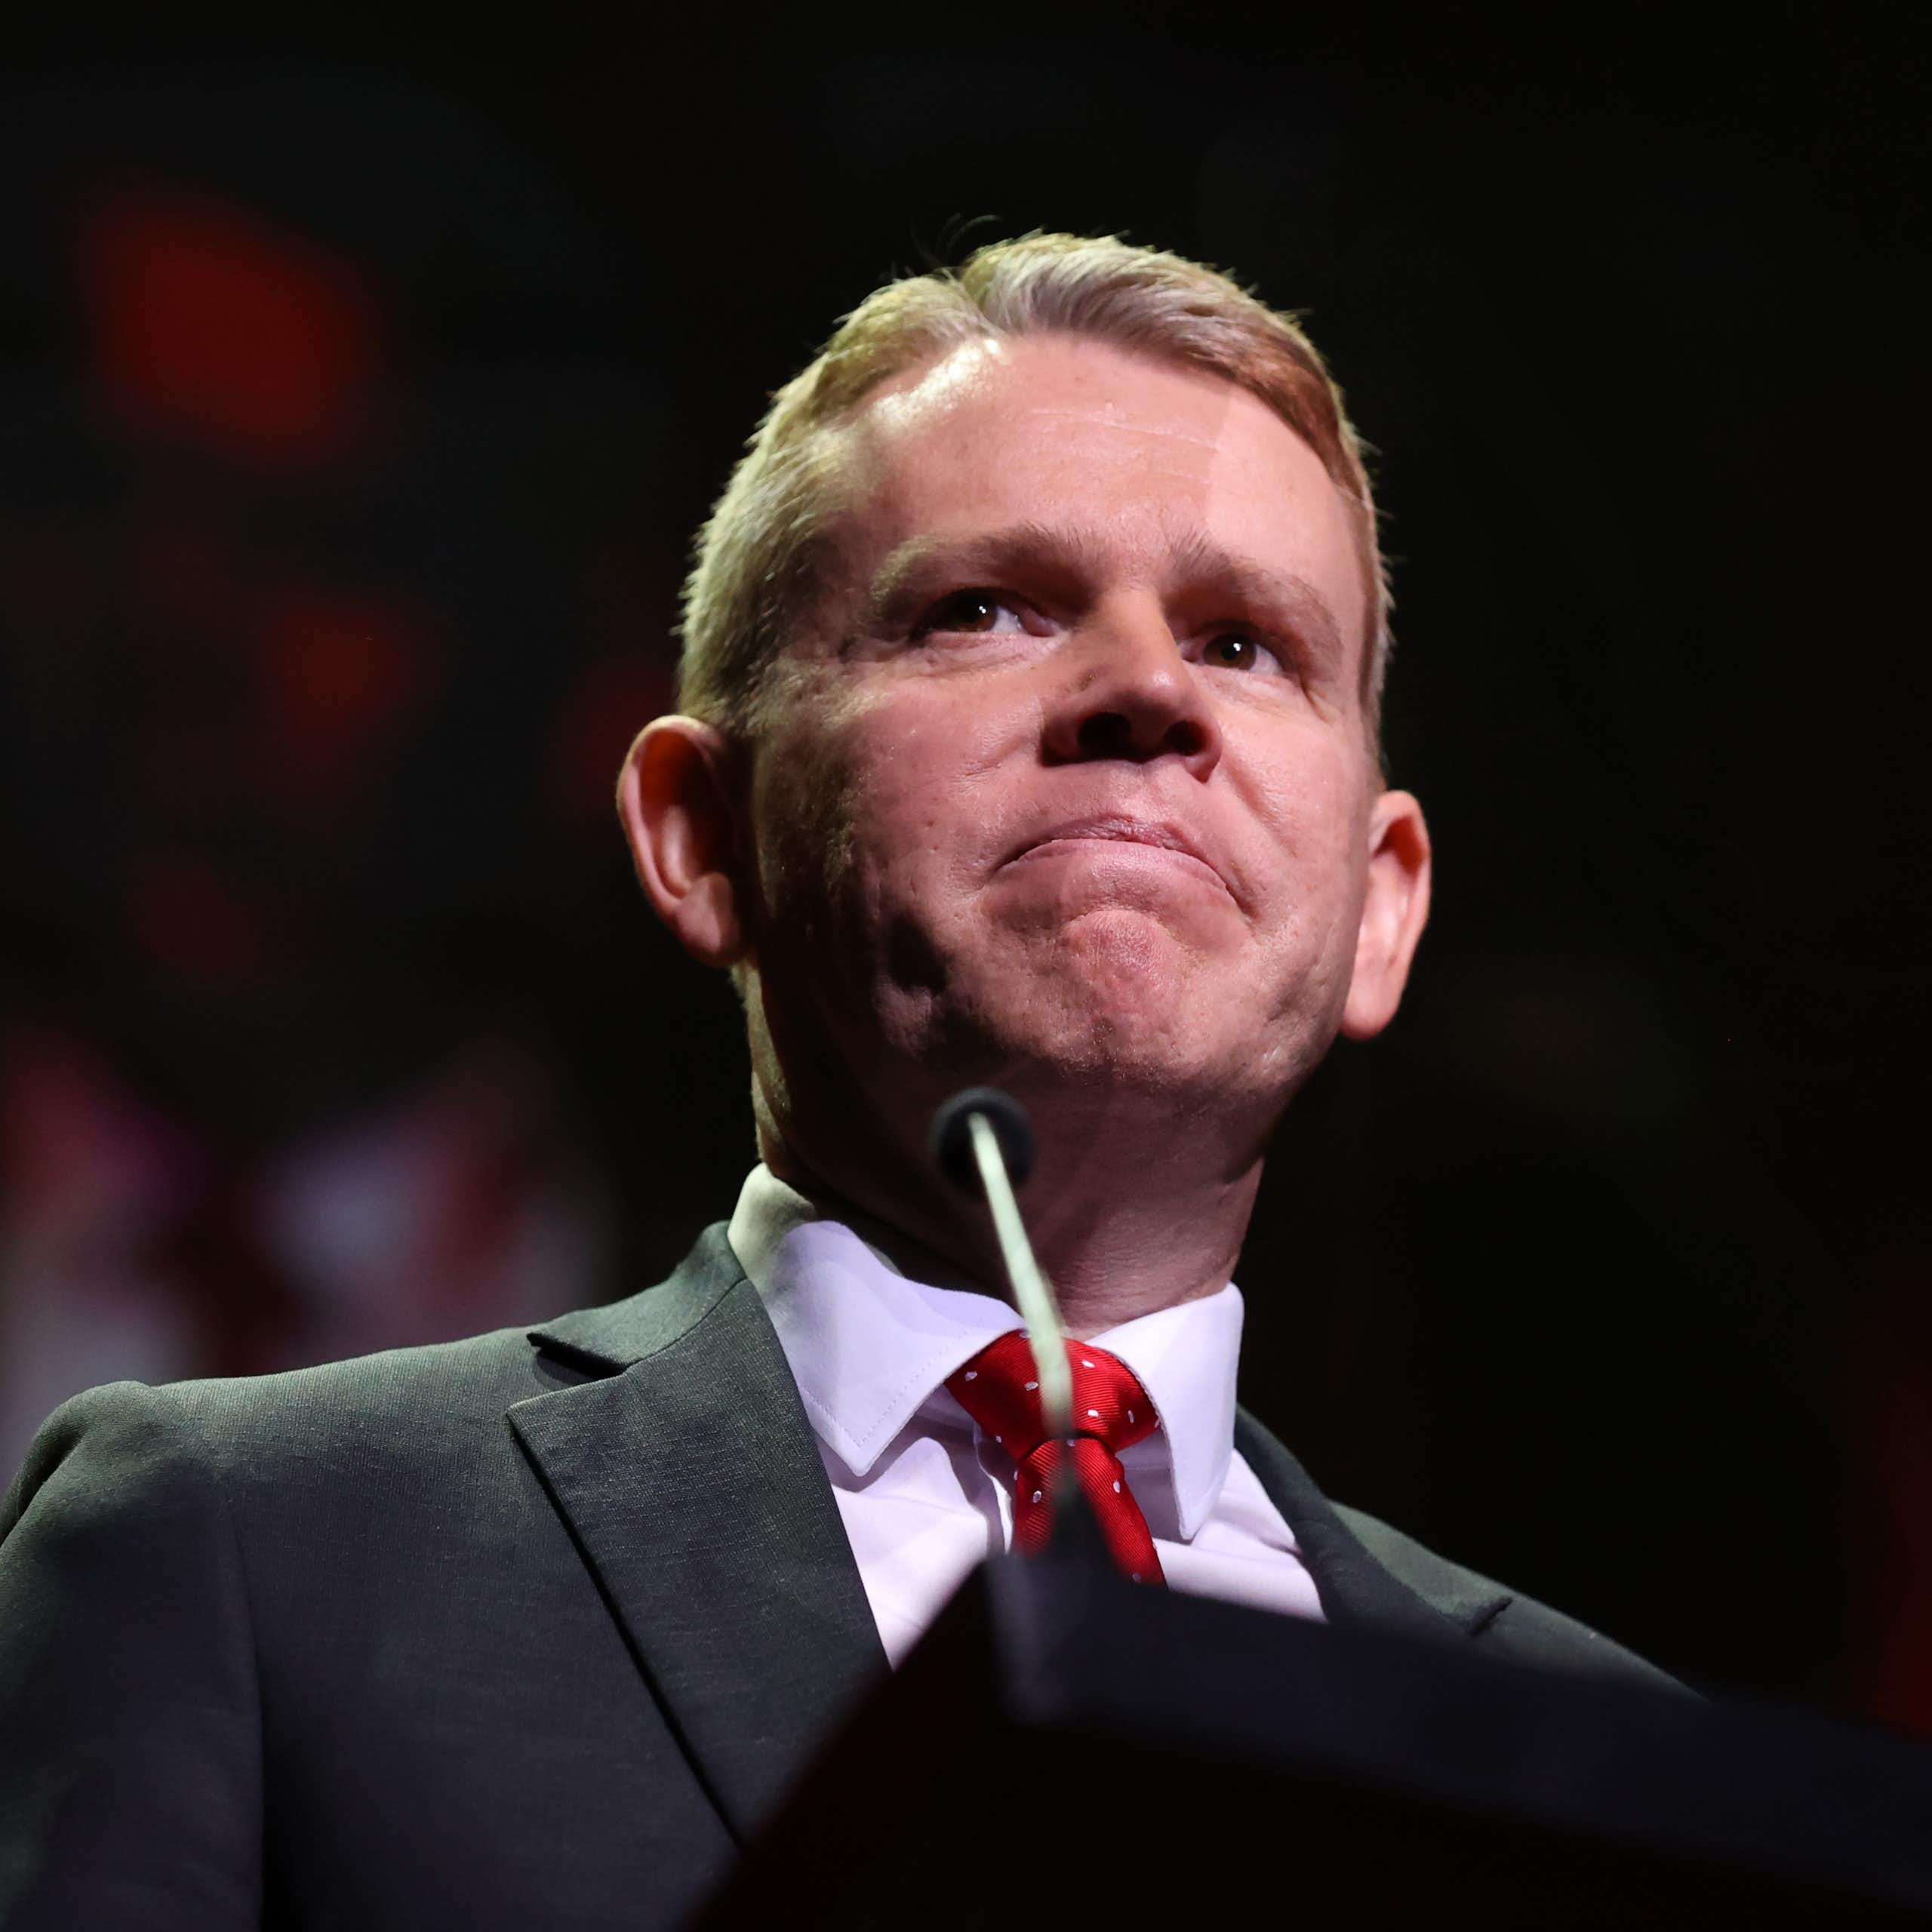 Controlling the political narrative is key to winning the NZ election – no easy task for Chris Hipkins